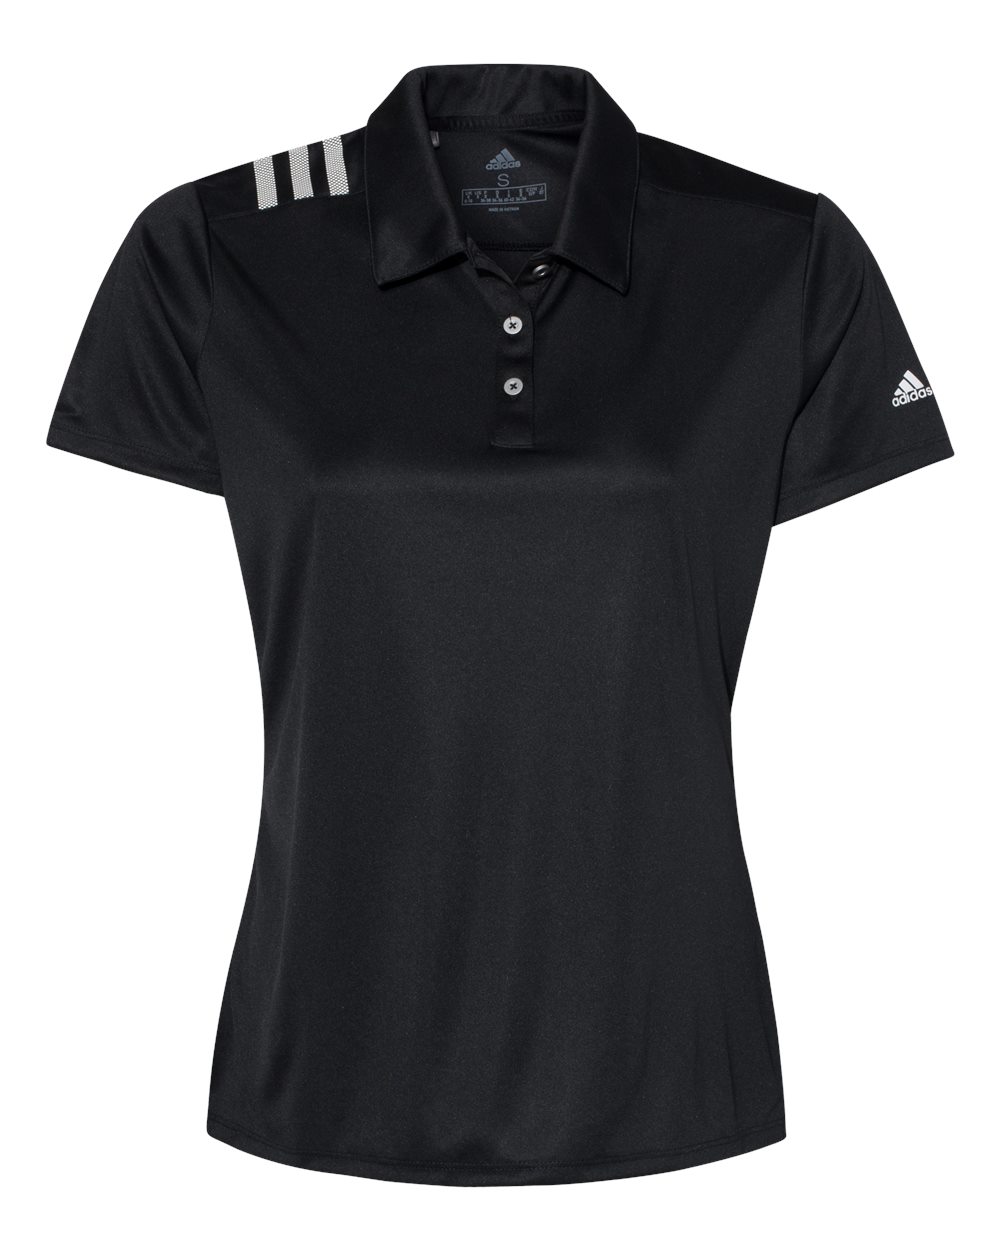 Picture of Adidas - Women's 3-Stripes Shoulder Polo